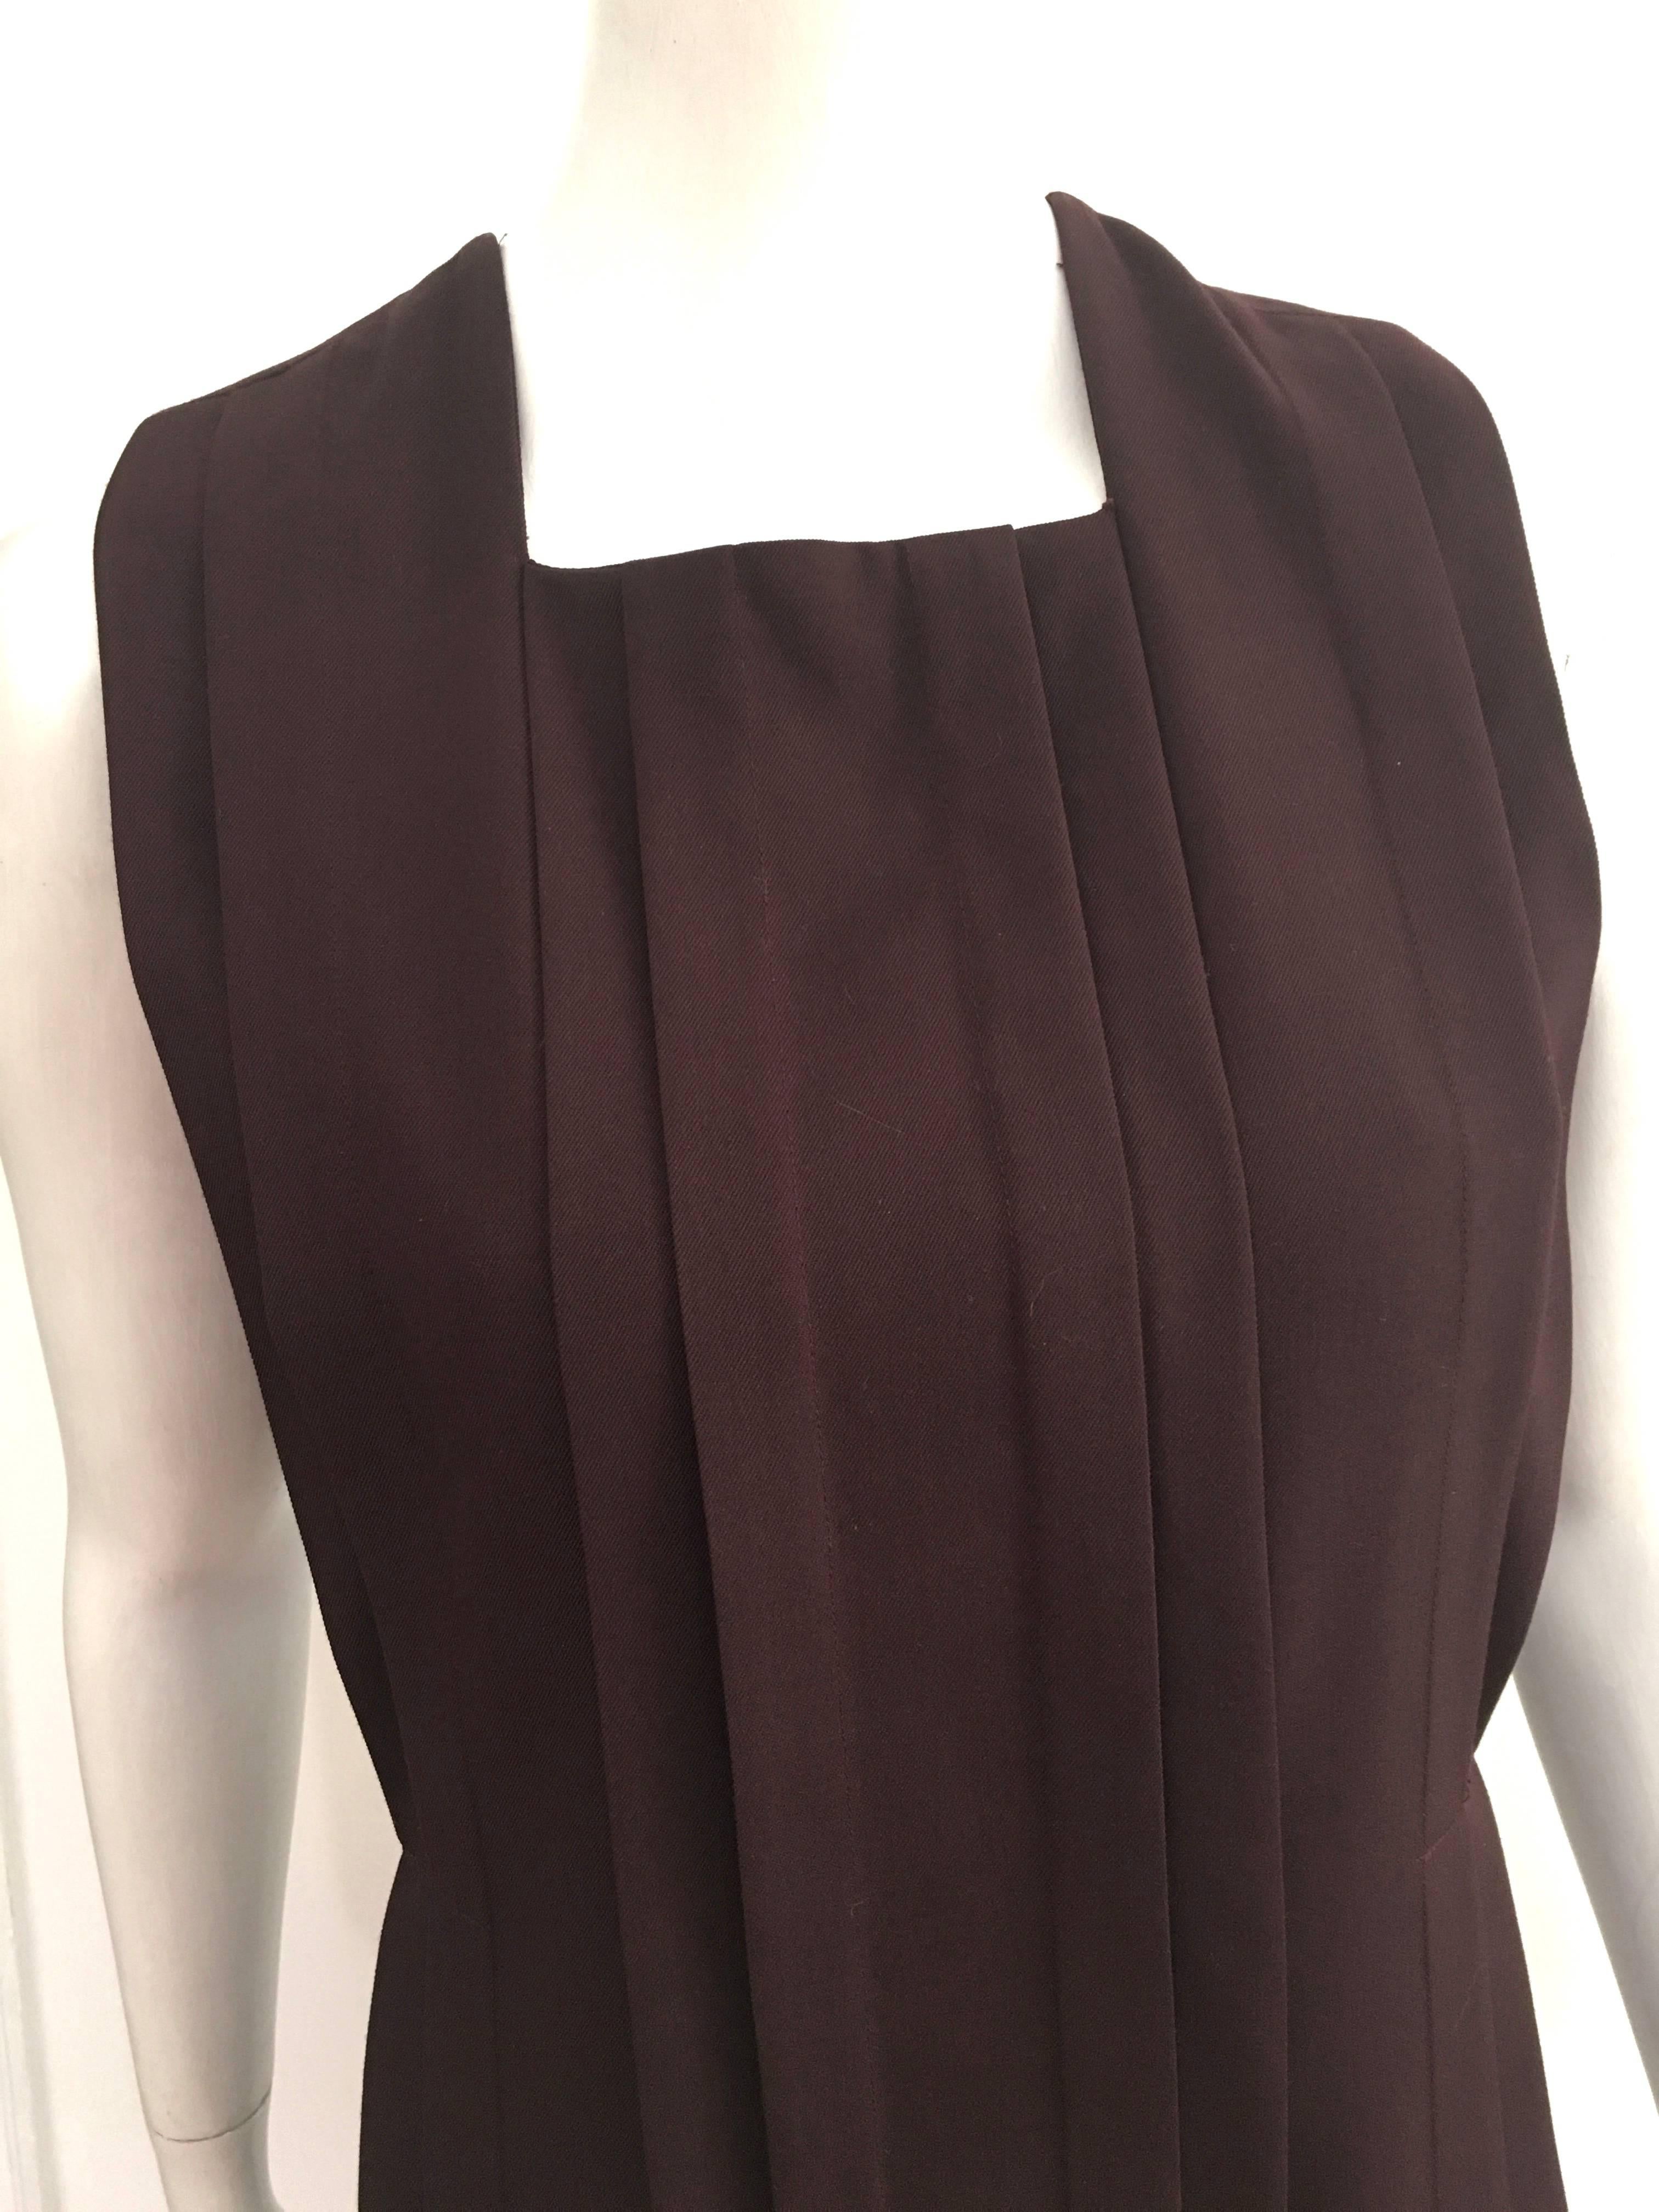 Cacharel burgundy wool sleeveless pleated dress is a size 8.  Ladies please use your measuring tape so you can properly measure your bust, waist & hips to make certain this will fit your lovely body. Pleats in front of dress as well as the backside